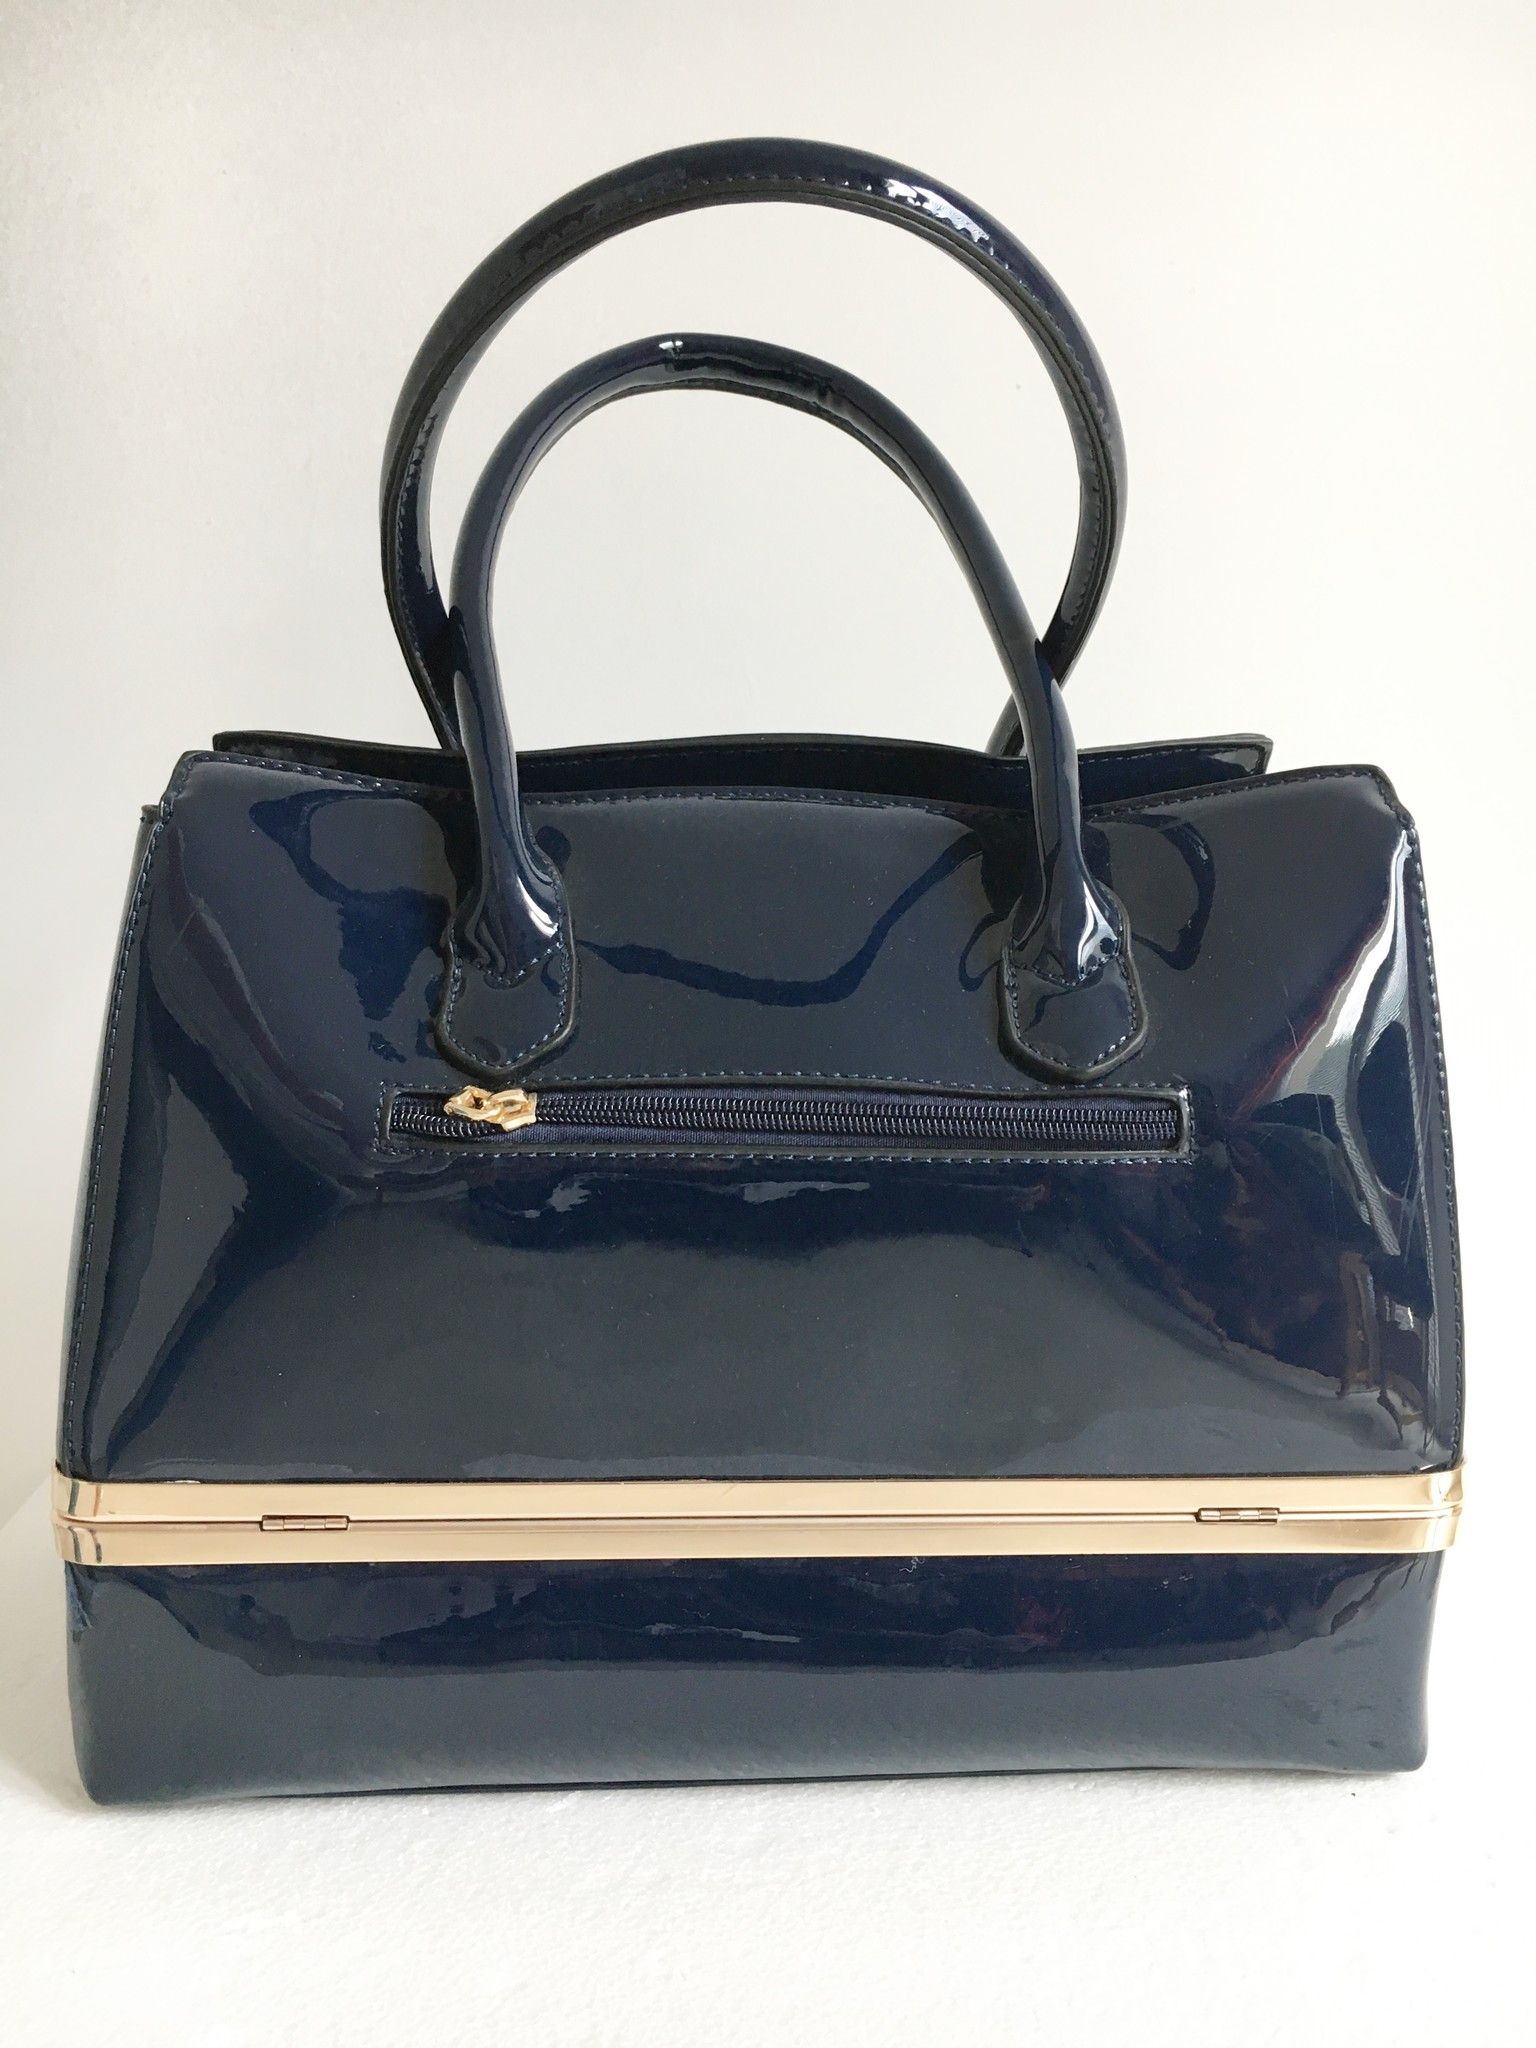 Patent leather with gold trim Padlock bag Cod.1025